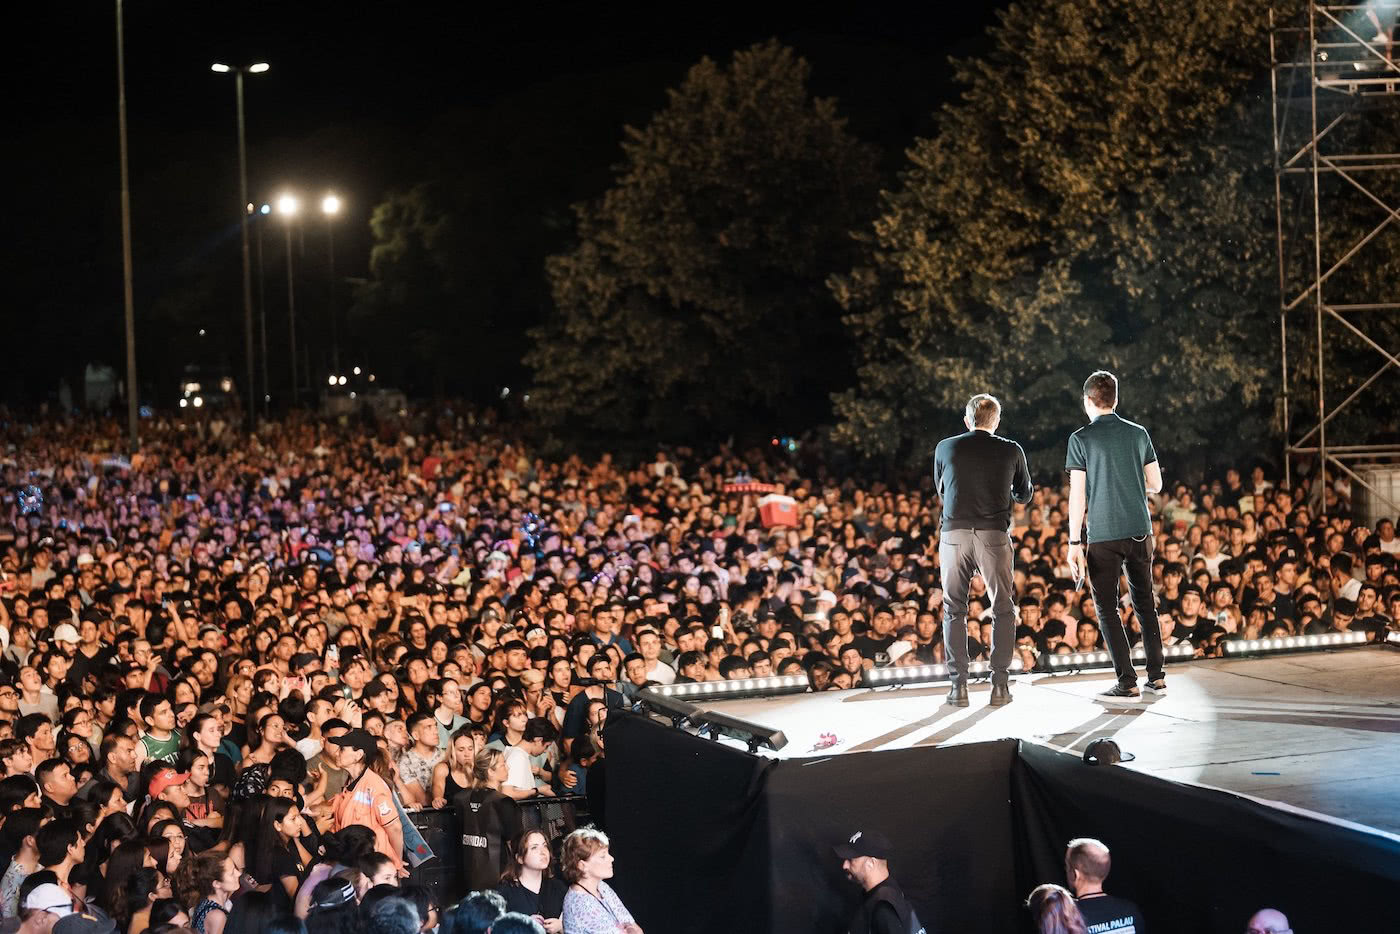 Andrew Palau returned to deliver the same message of hope to a new generation in Buenos Aires, the capital city of Argentina.